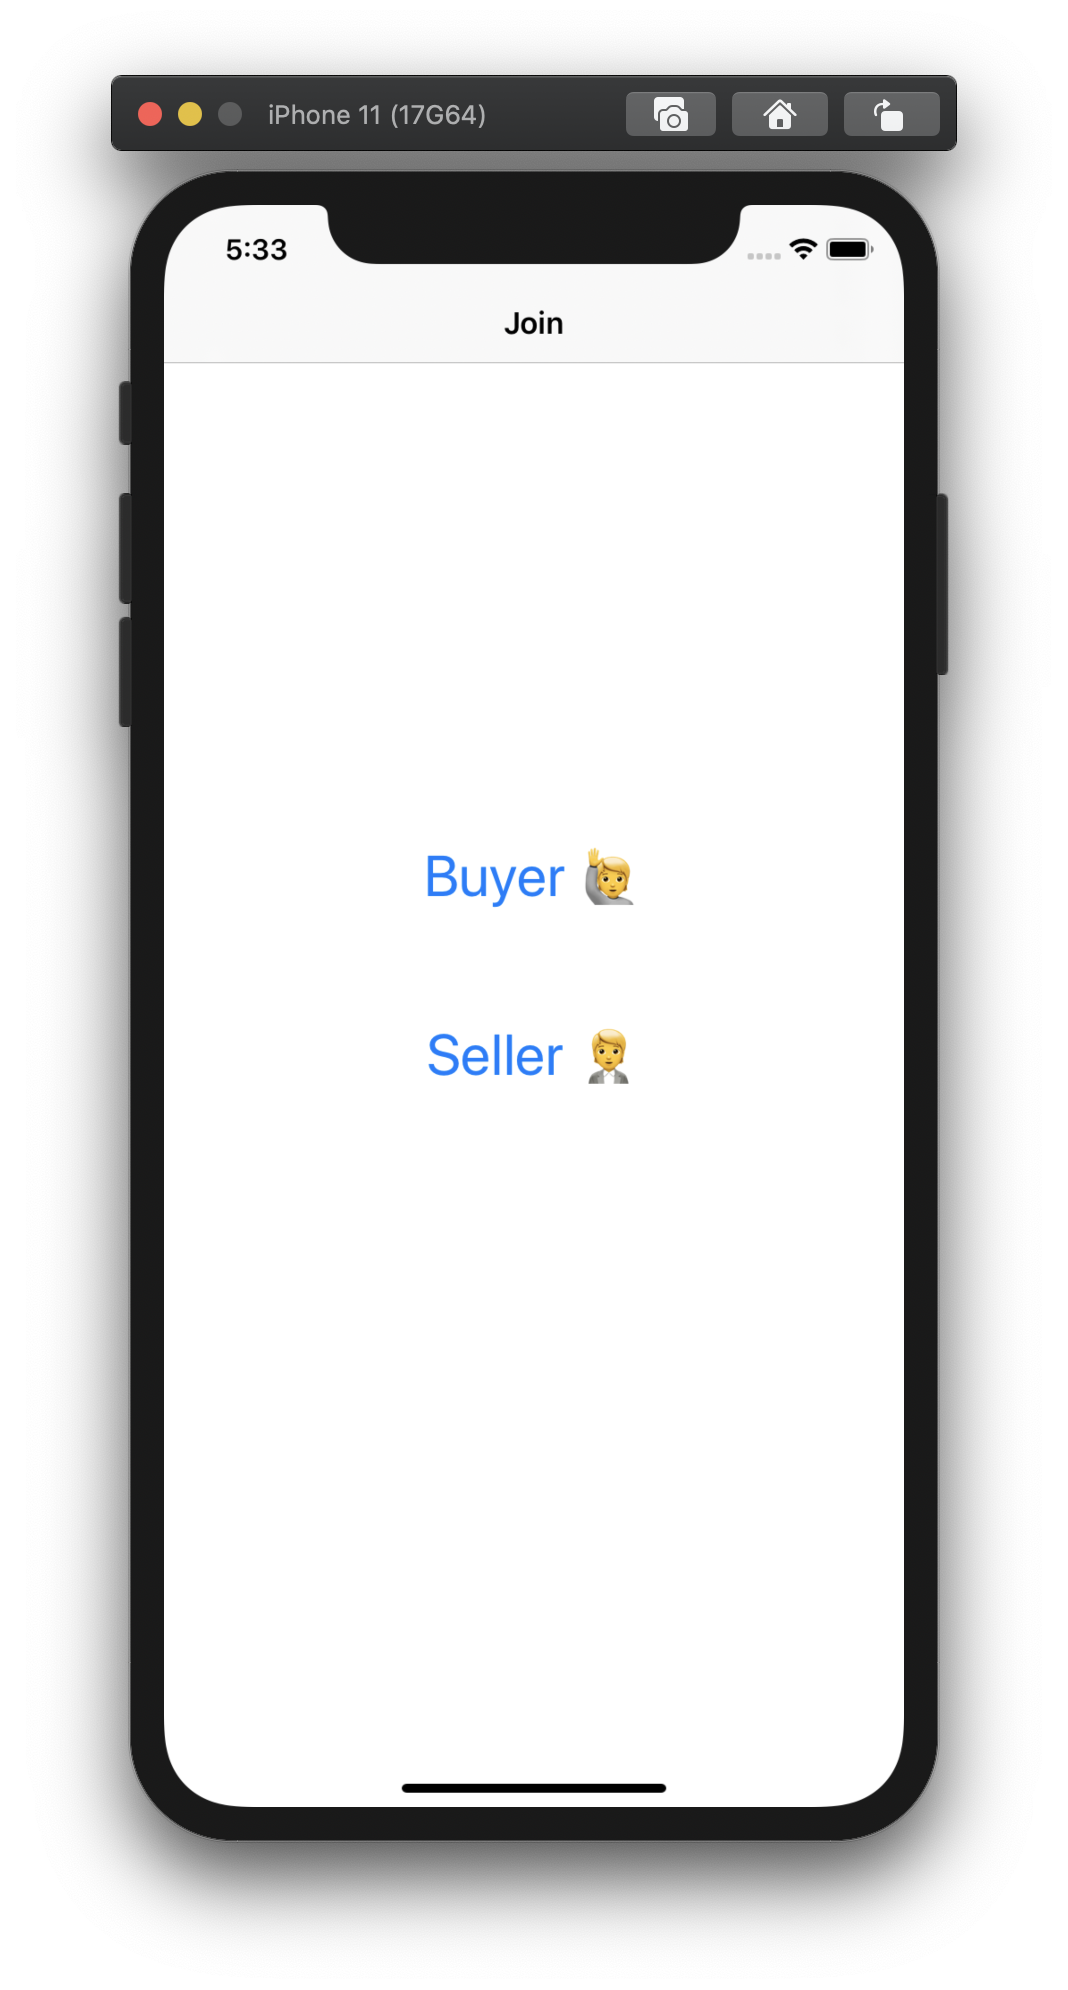 Screenshot shows an app with two buttons, one to join as a buyer, and the other to join as the seller